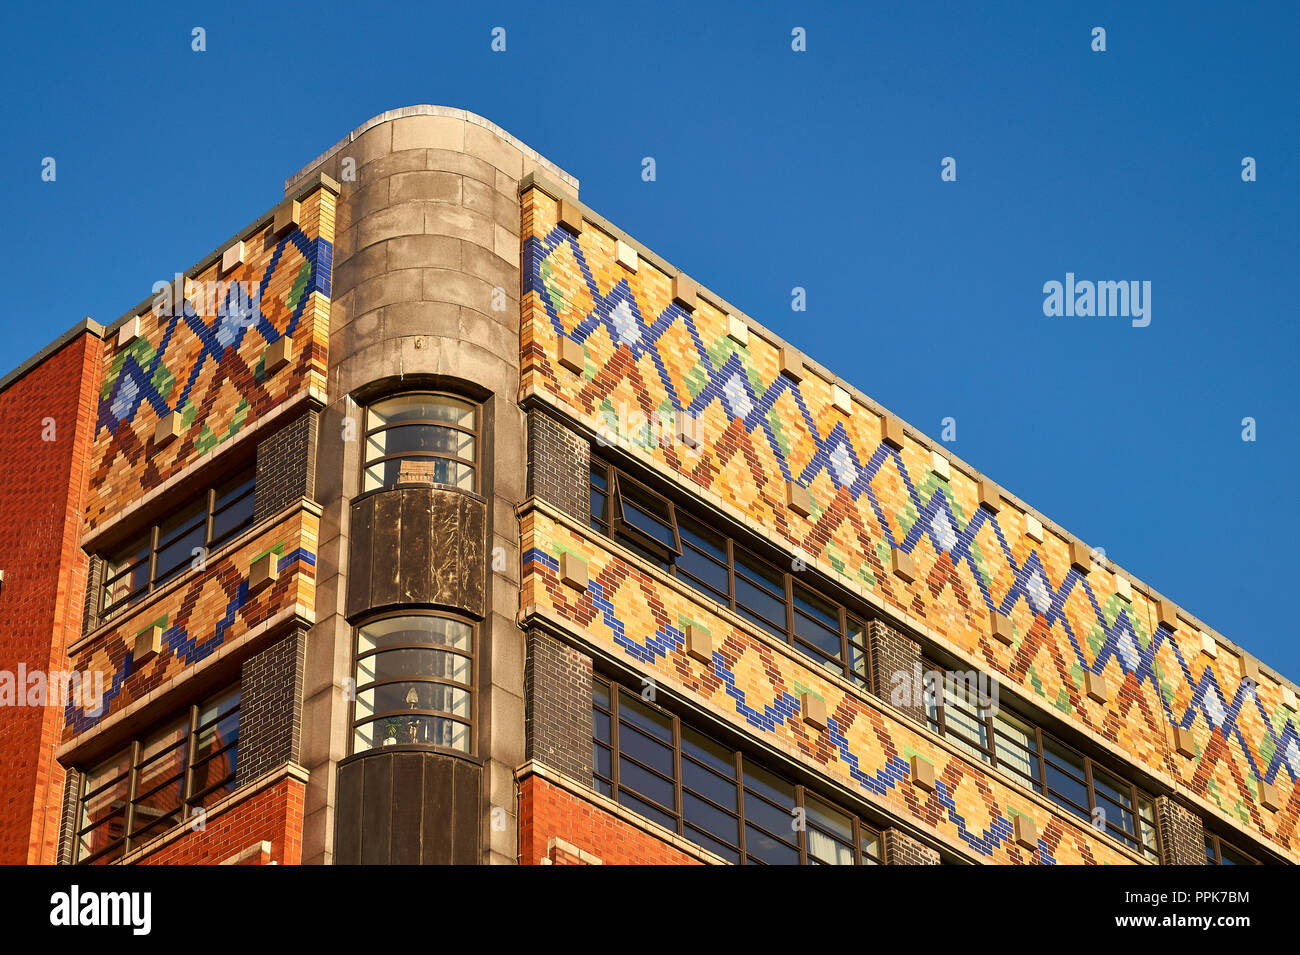 Fragment of a facade of the Templeton Building in Glasgow, home to a popular WEST restaurant and brewery. Stock Photo